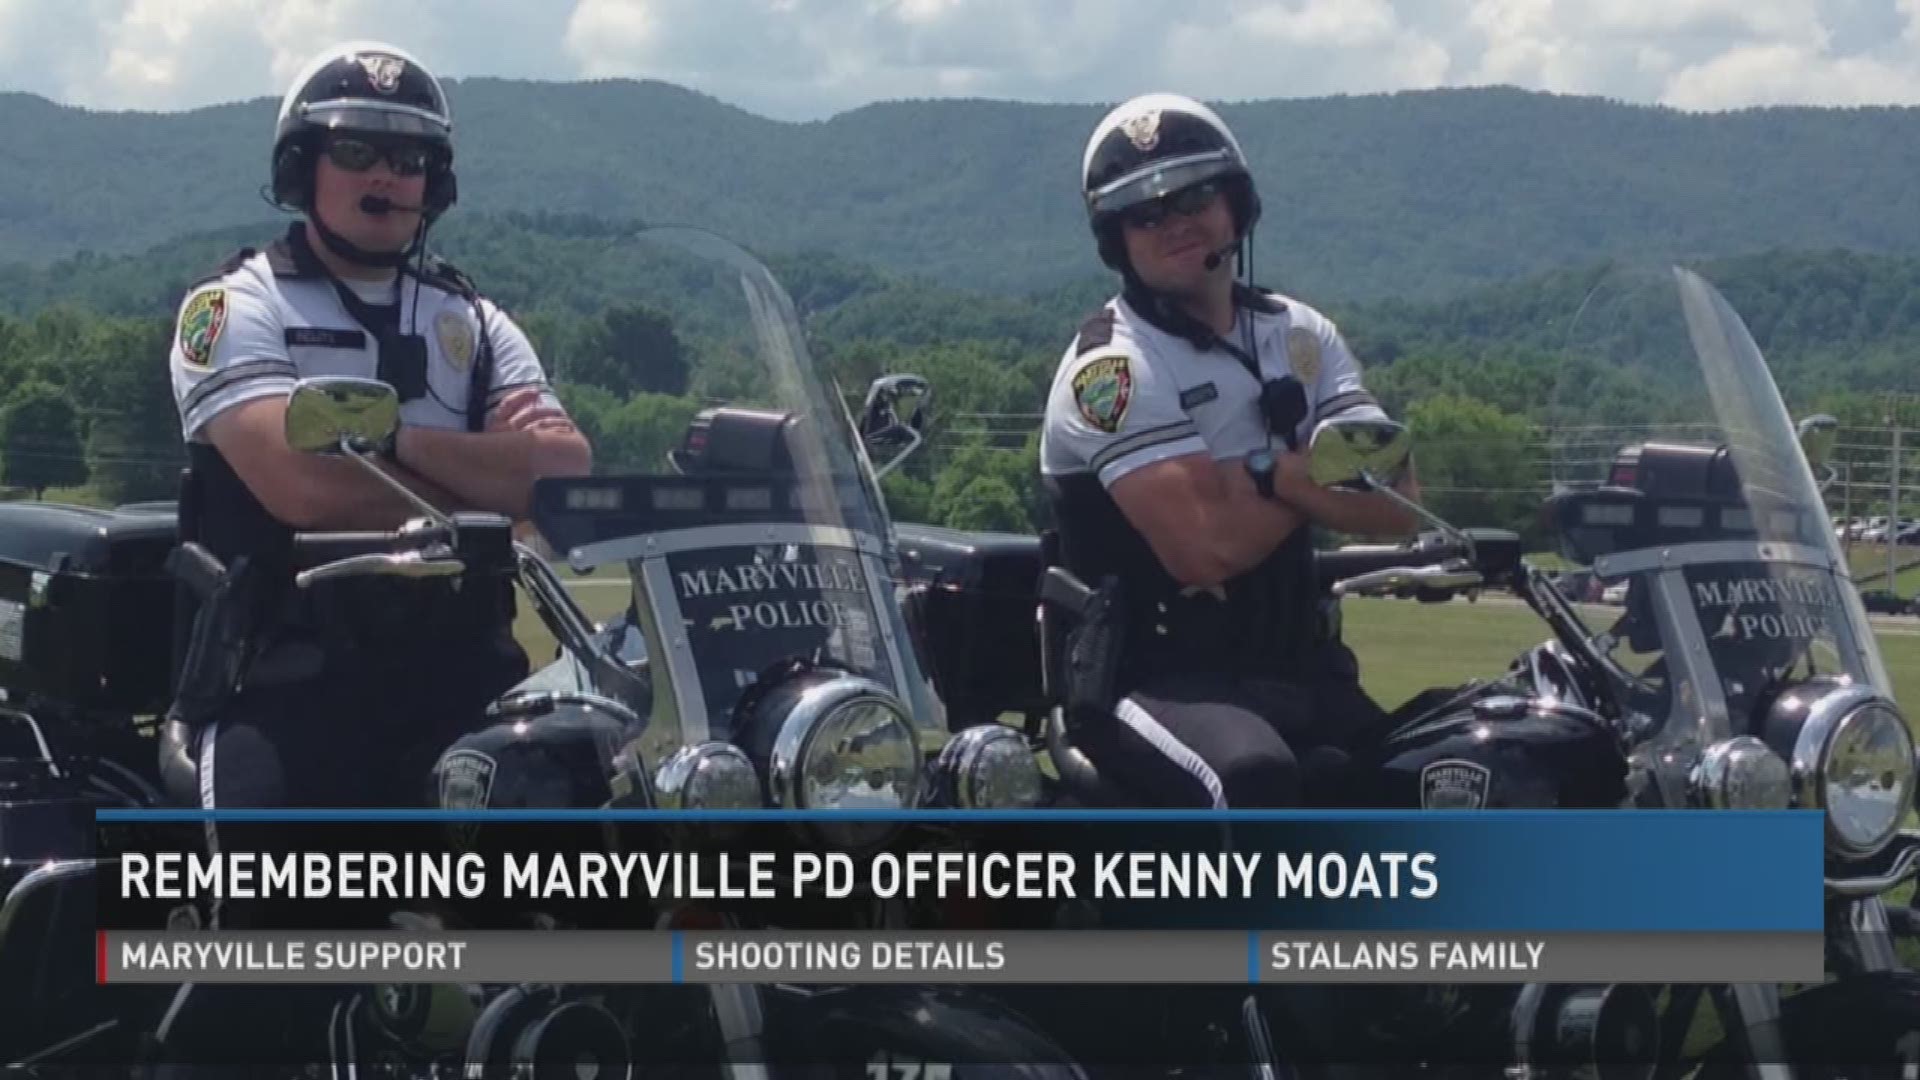 Friends and co-workers say you couldn't ask for a better officer, friend or father than fallen Maryville Police Officer Kenny Moats.